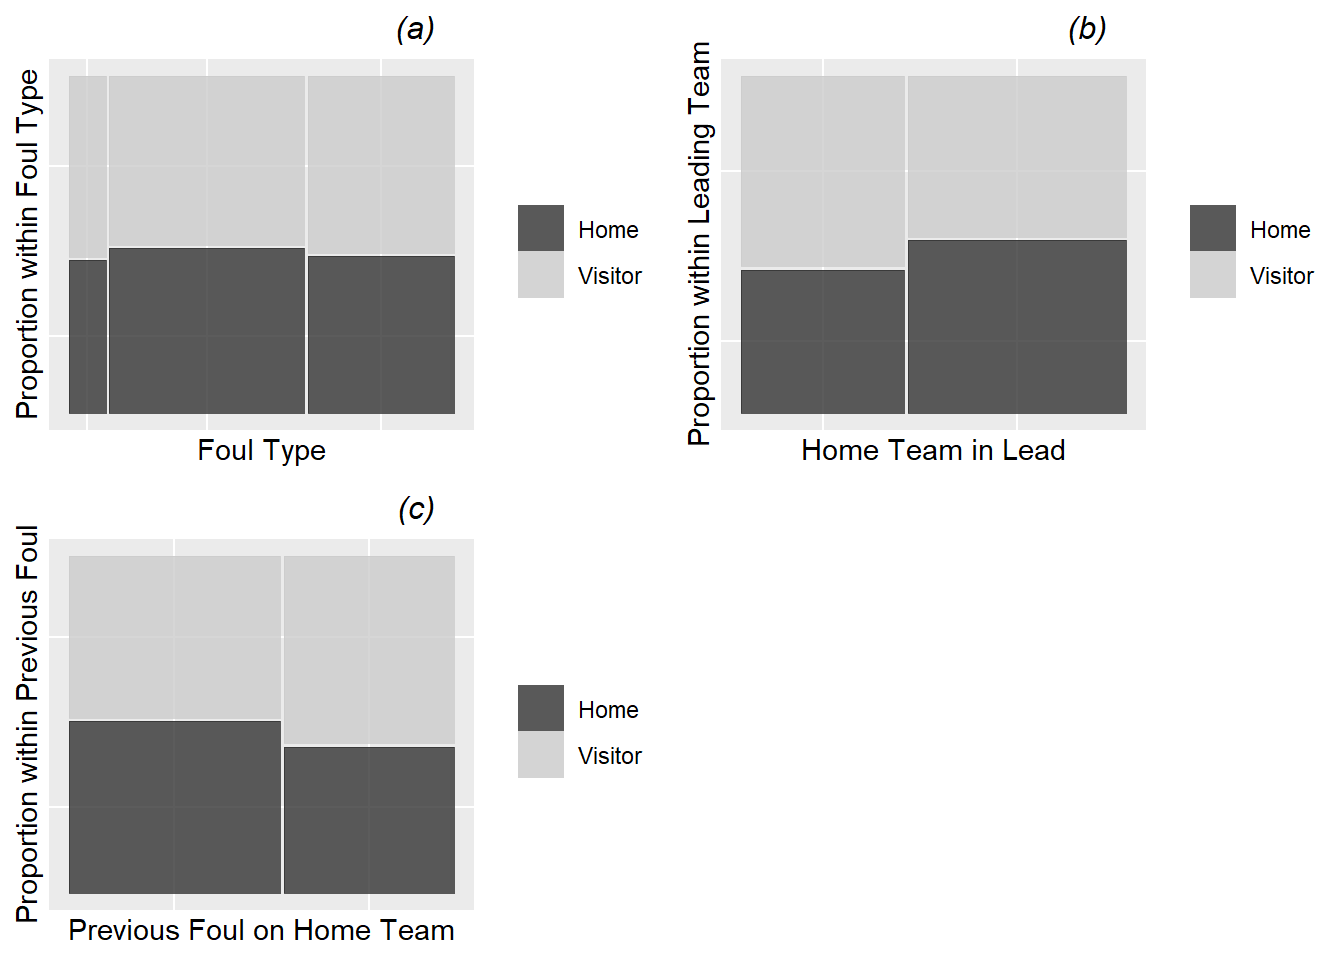 Mosaic plots of the binary model response (foul called on home or visitor) vs. the three categorical Level One covariates (foul type (a), team in the lead (b), and team called for the previous foul (c)).  Each bar shows the percentage of fouls called on the home team vs. the percentage of fouls called on the visiting team for a particular category of the covariate.  The bar width shows the proportion of fouls at each of the covariate levels.